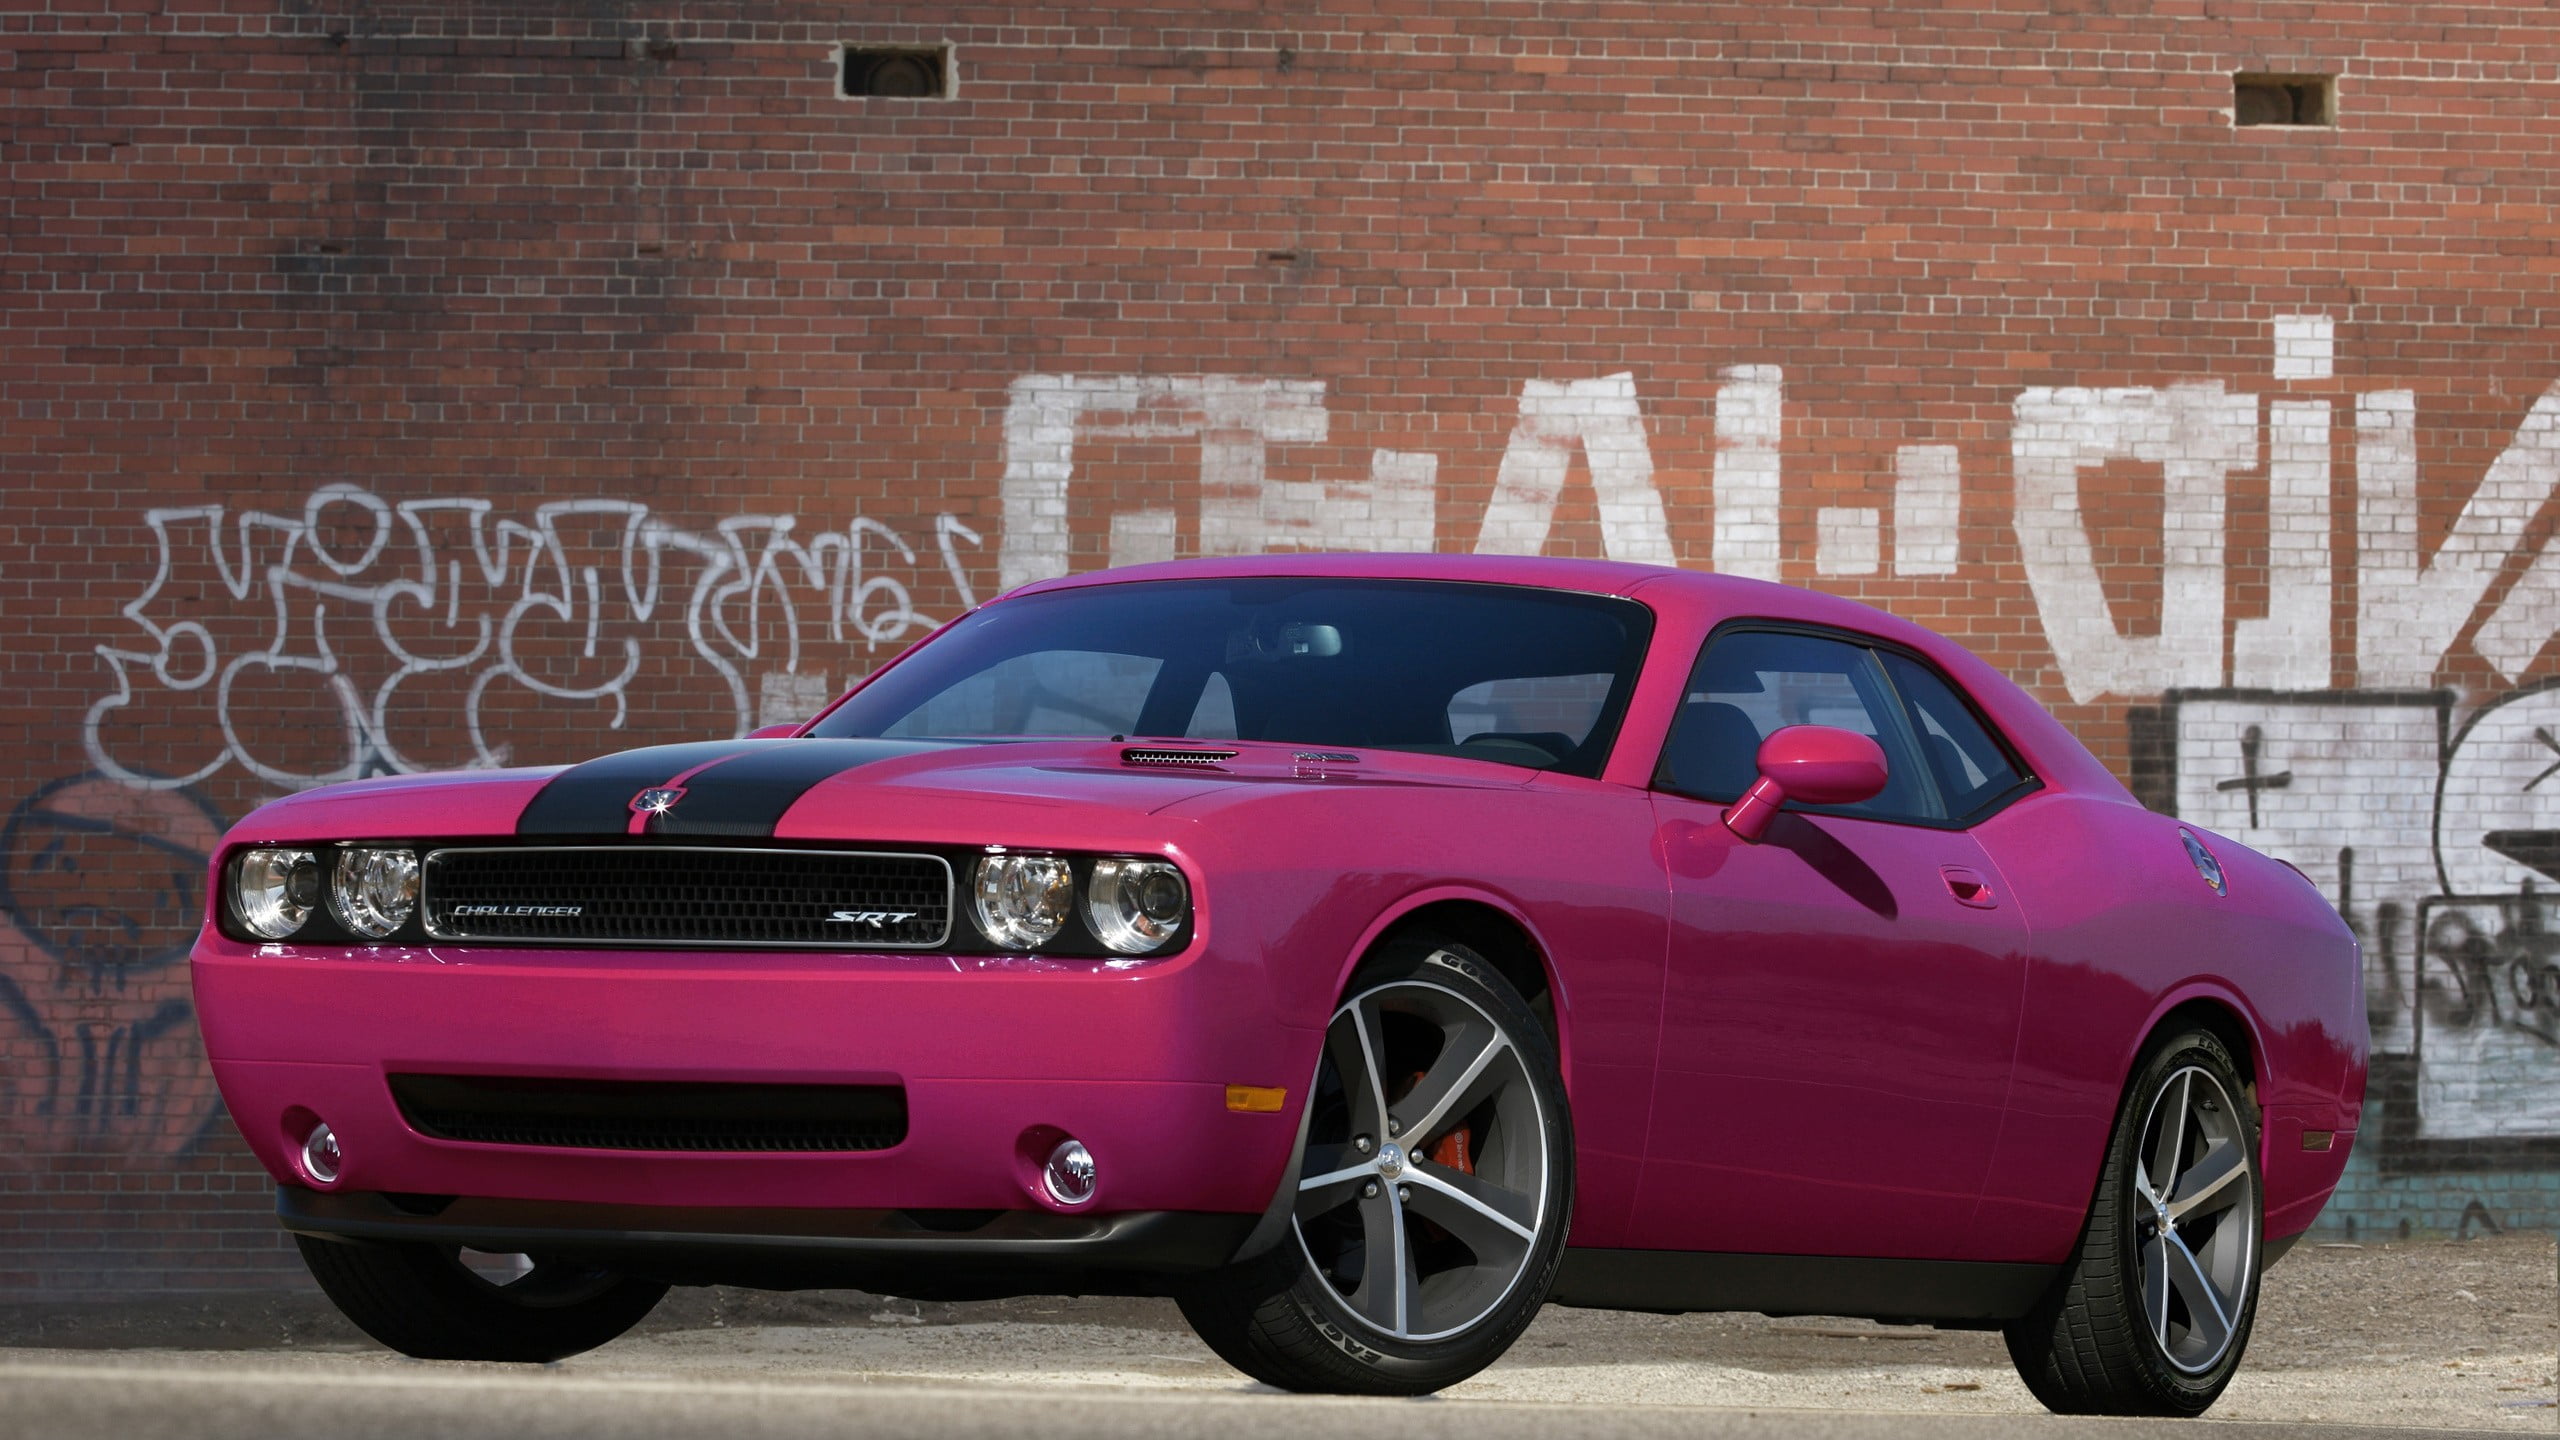 pink and black coupe, car, Dodge, Dodge Challenger, muscle cars